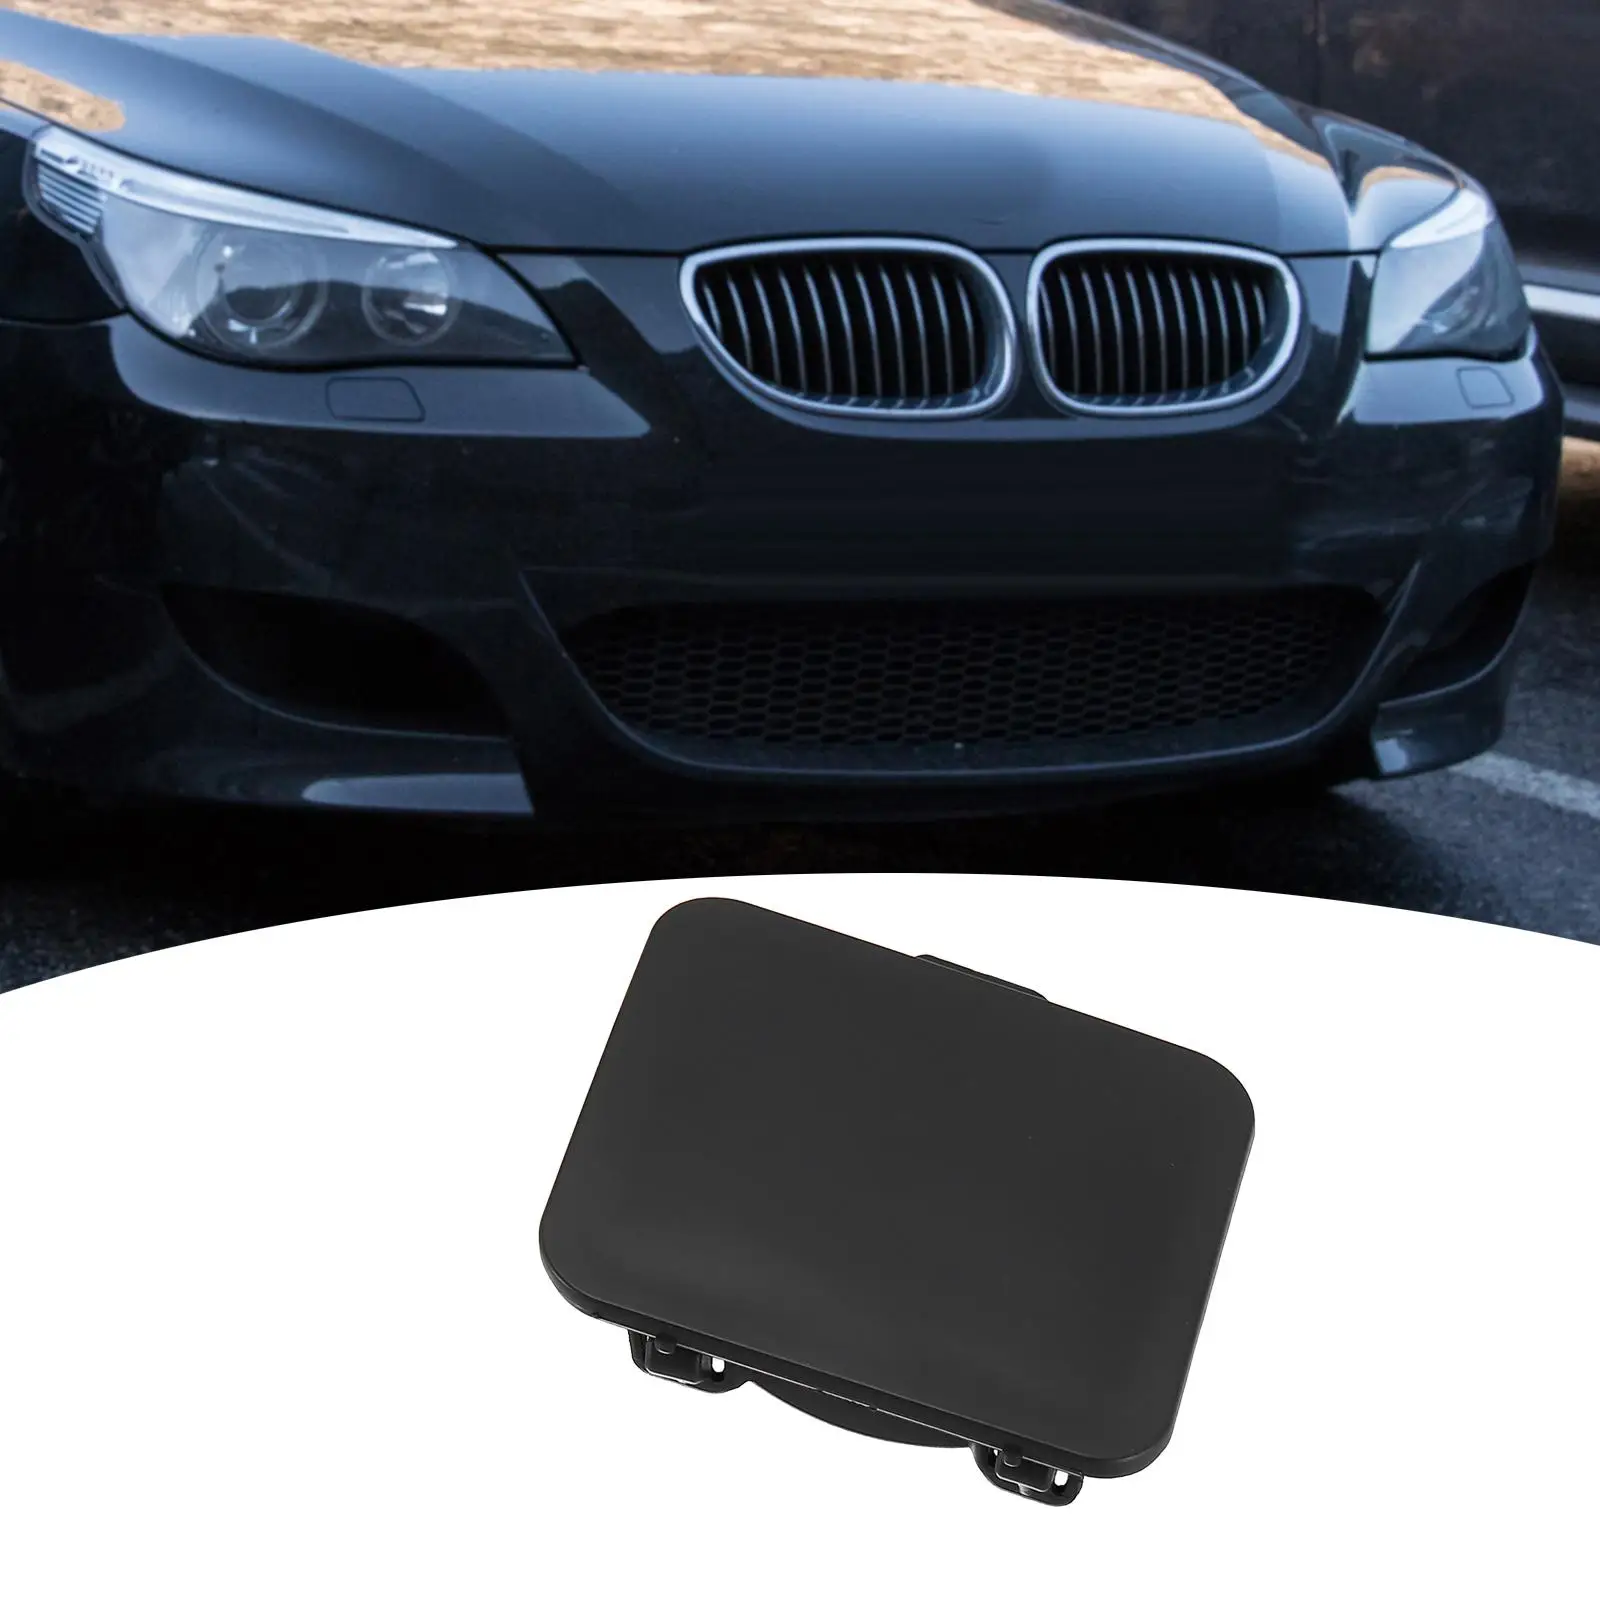 Tow Eye Hook Cover Cap 51117897210 Tow Hole Cover for BMW E60 M Sport